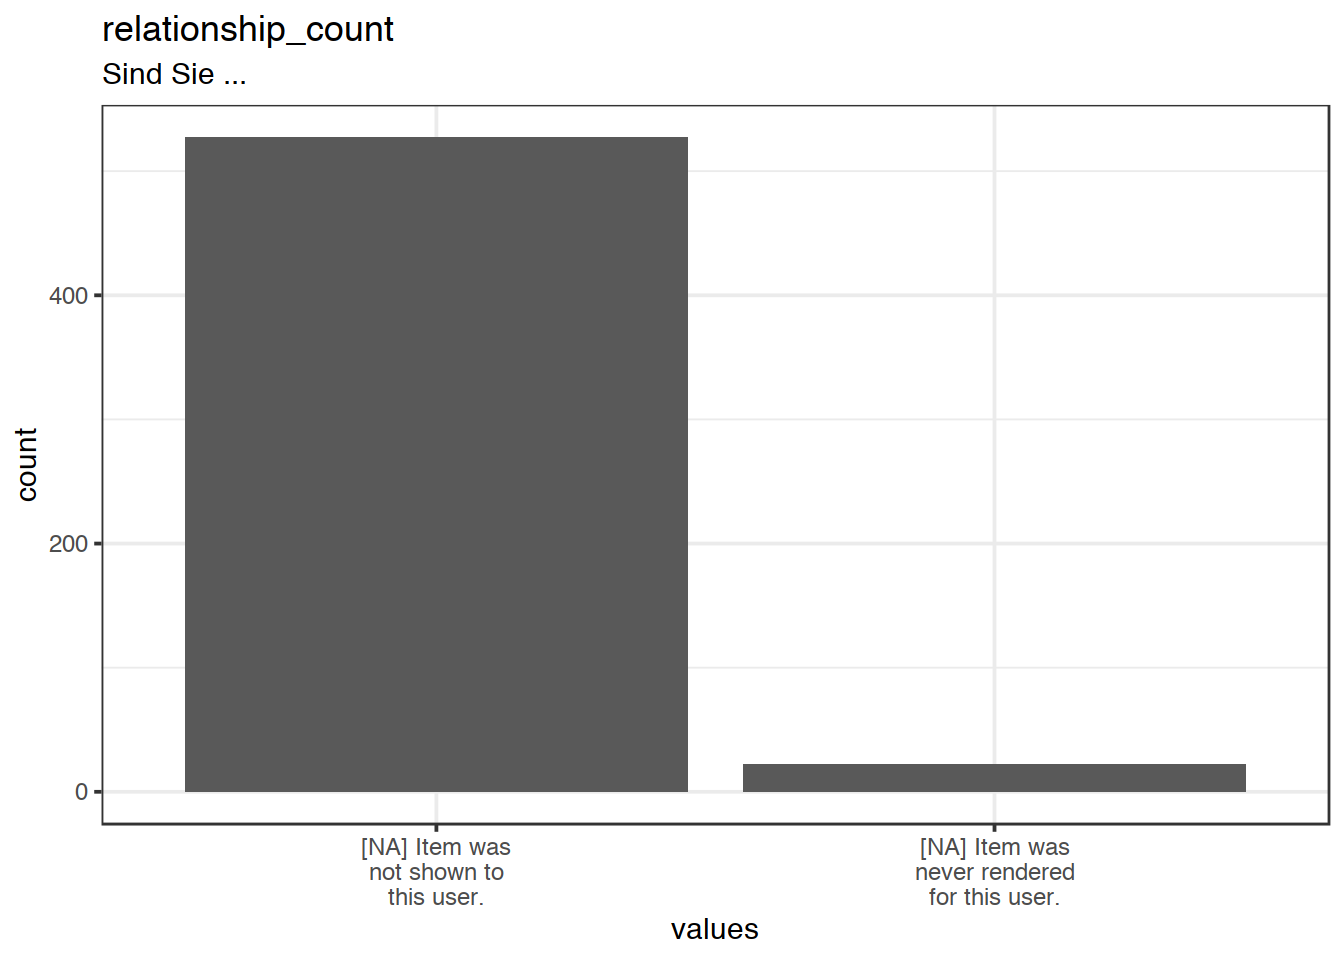 Plot of missing values for relationship_count